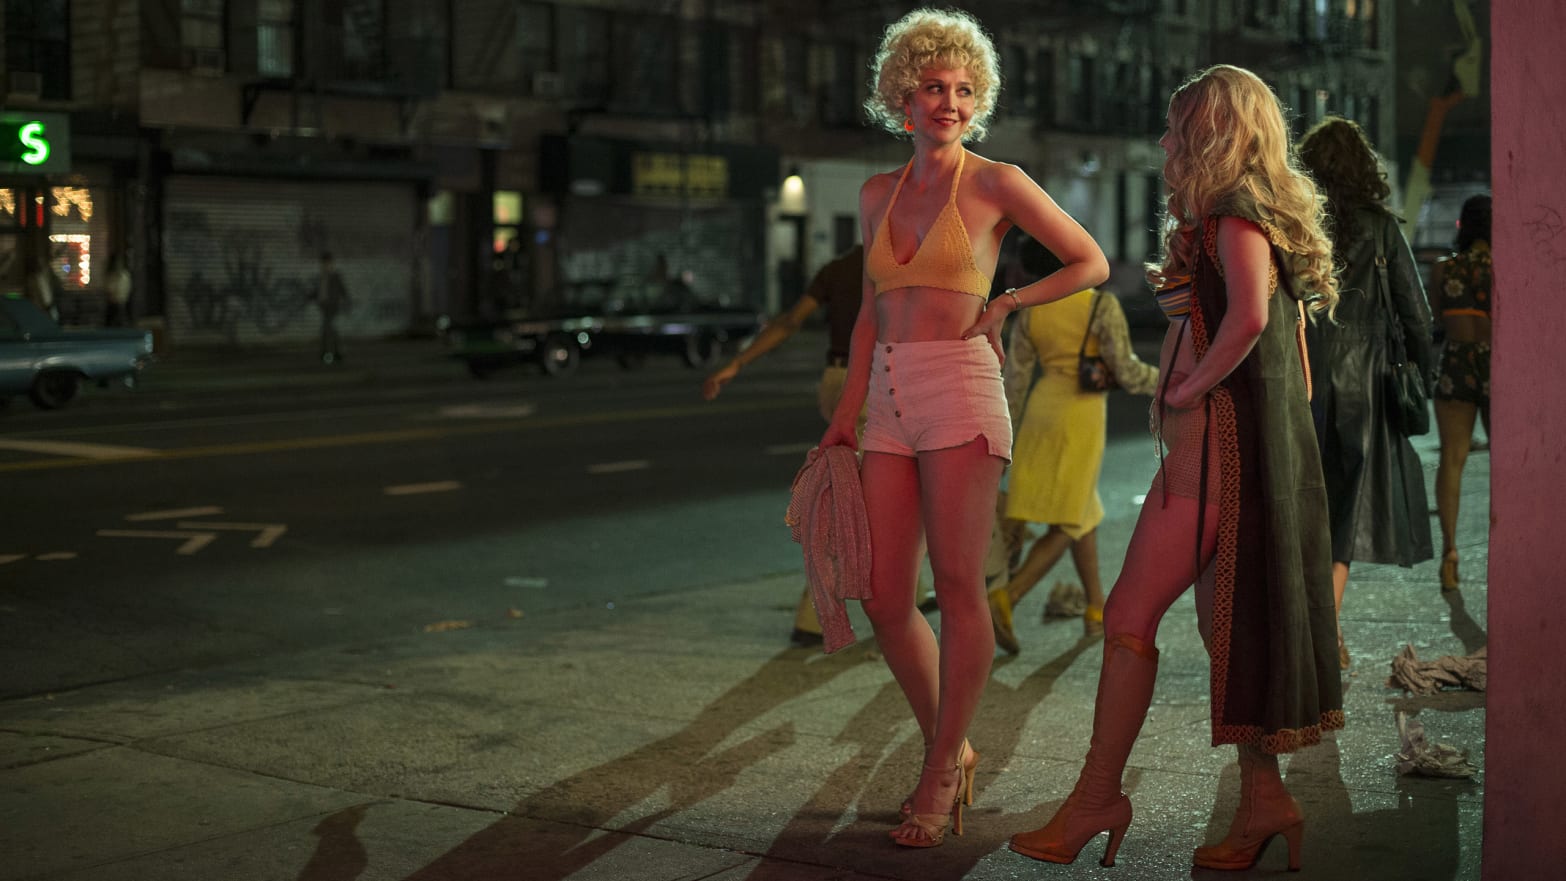 70s Porn Scetch - HBO's New '70s Porn Drama 'The Deuce' Casts a Female Gaze on Sex